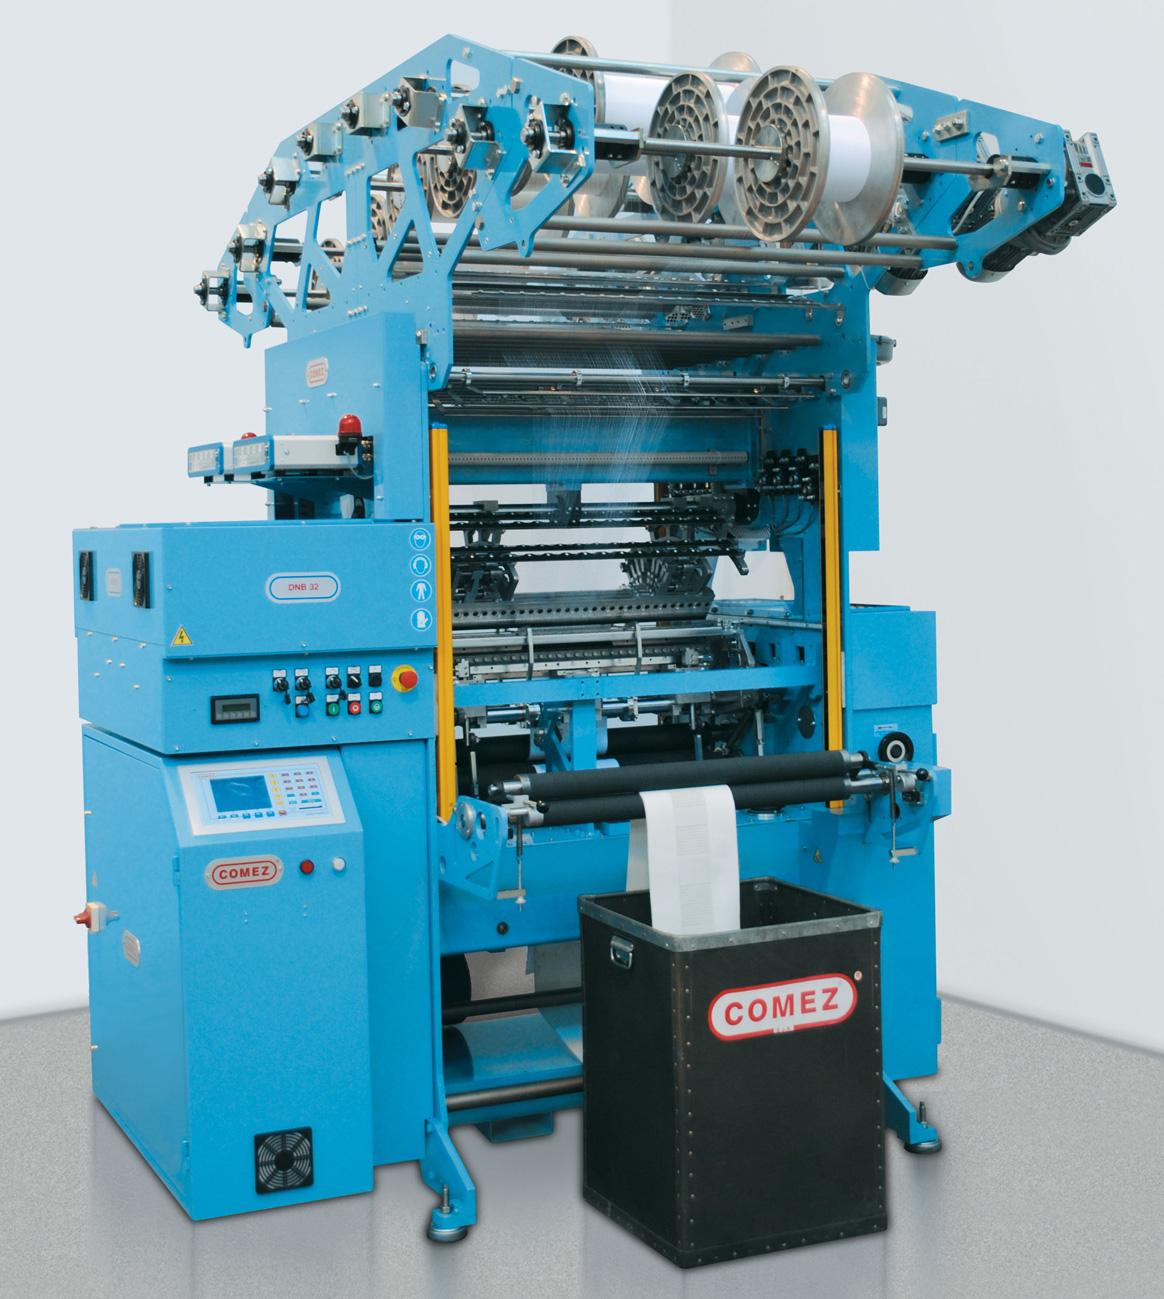 Continued Growth For Italian Textile Machinery Sector